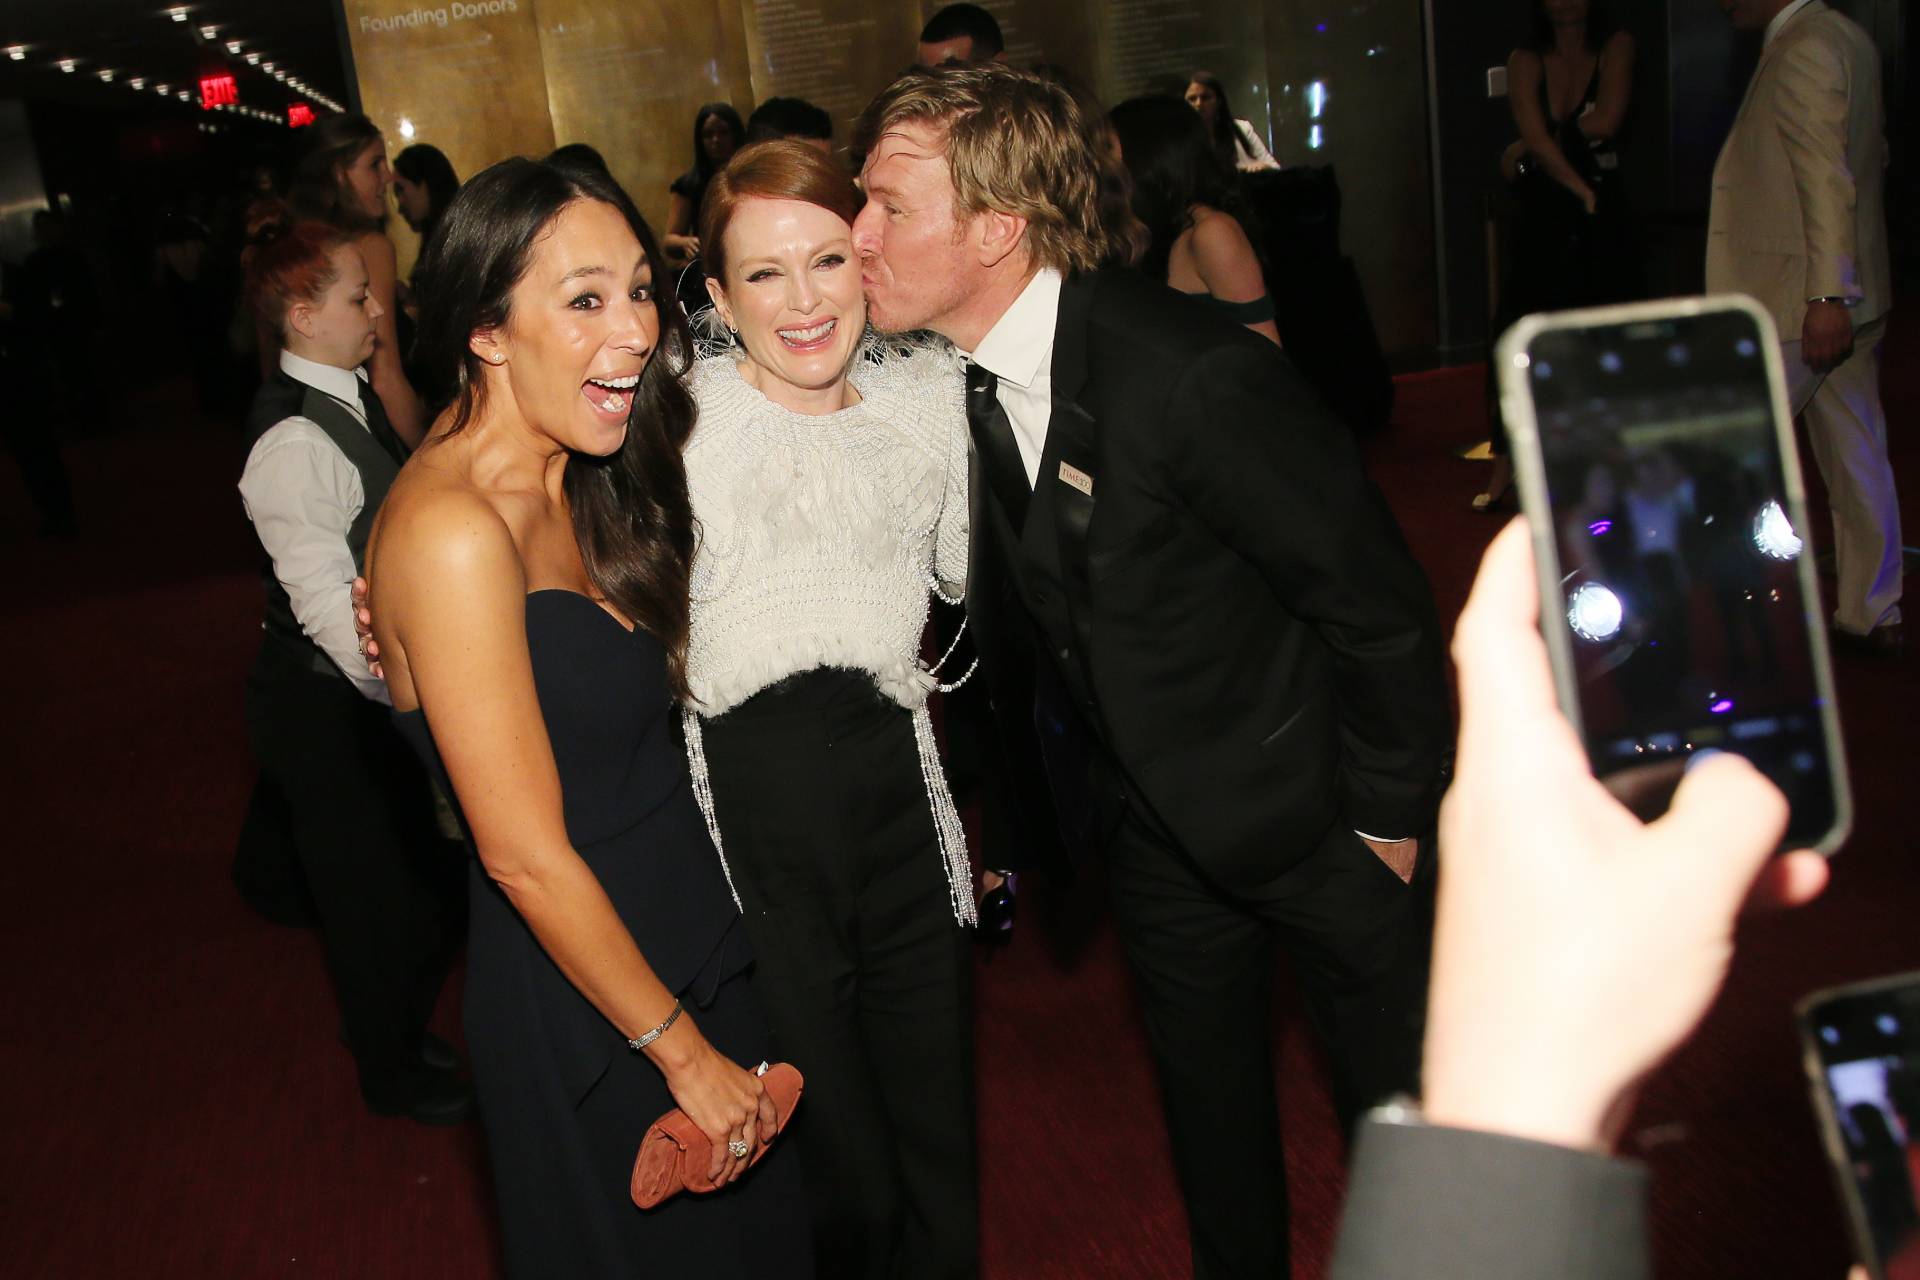 Joanna Gaines, Julianne Moore, and Chip Gaines | Jemal Countess/Getty Images for TIME